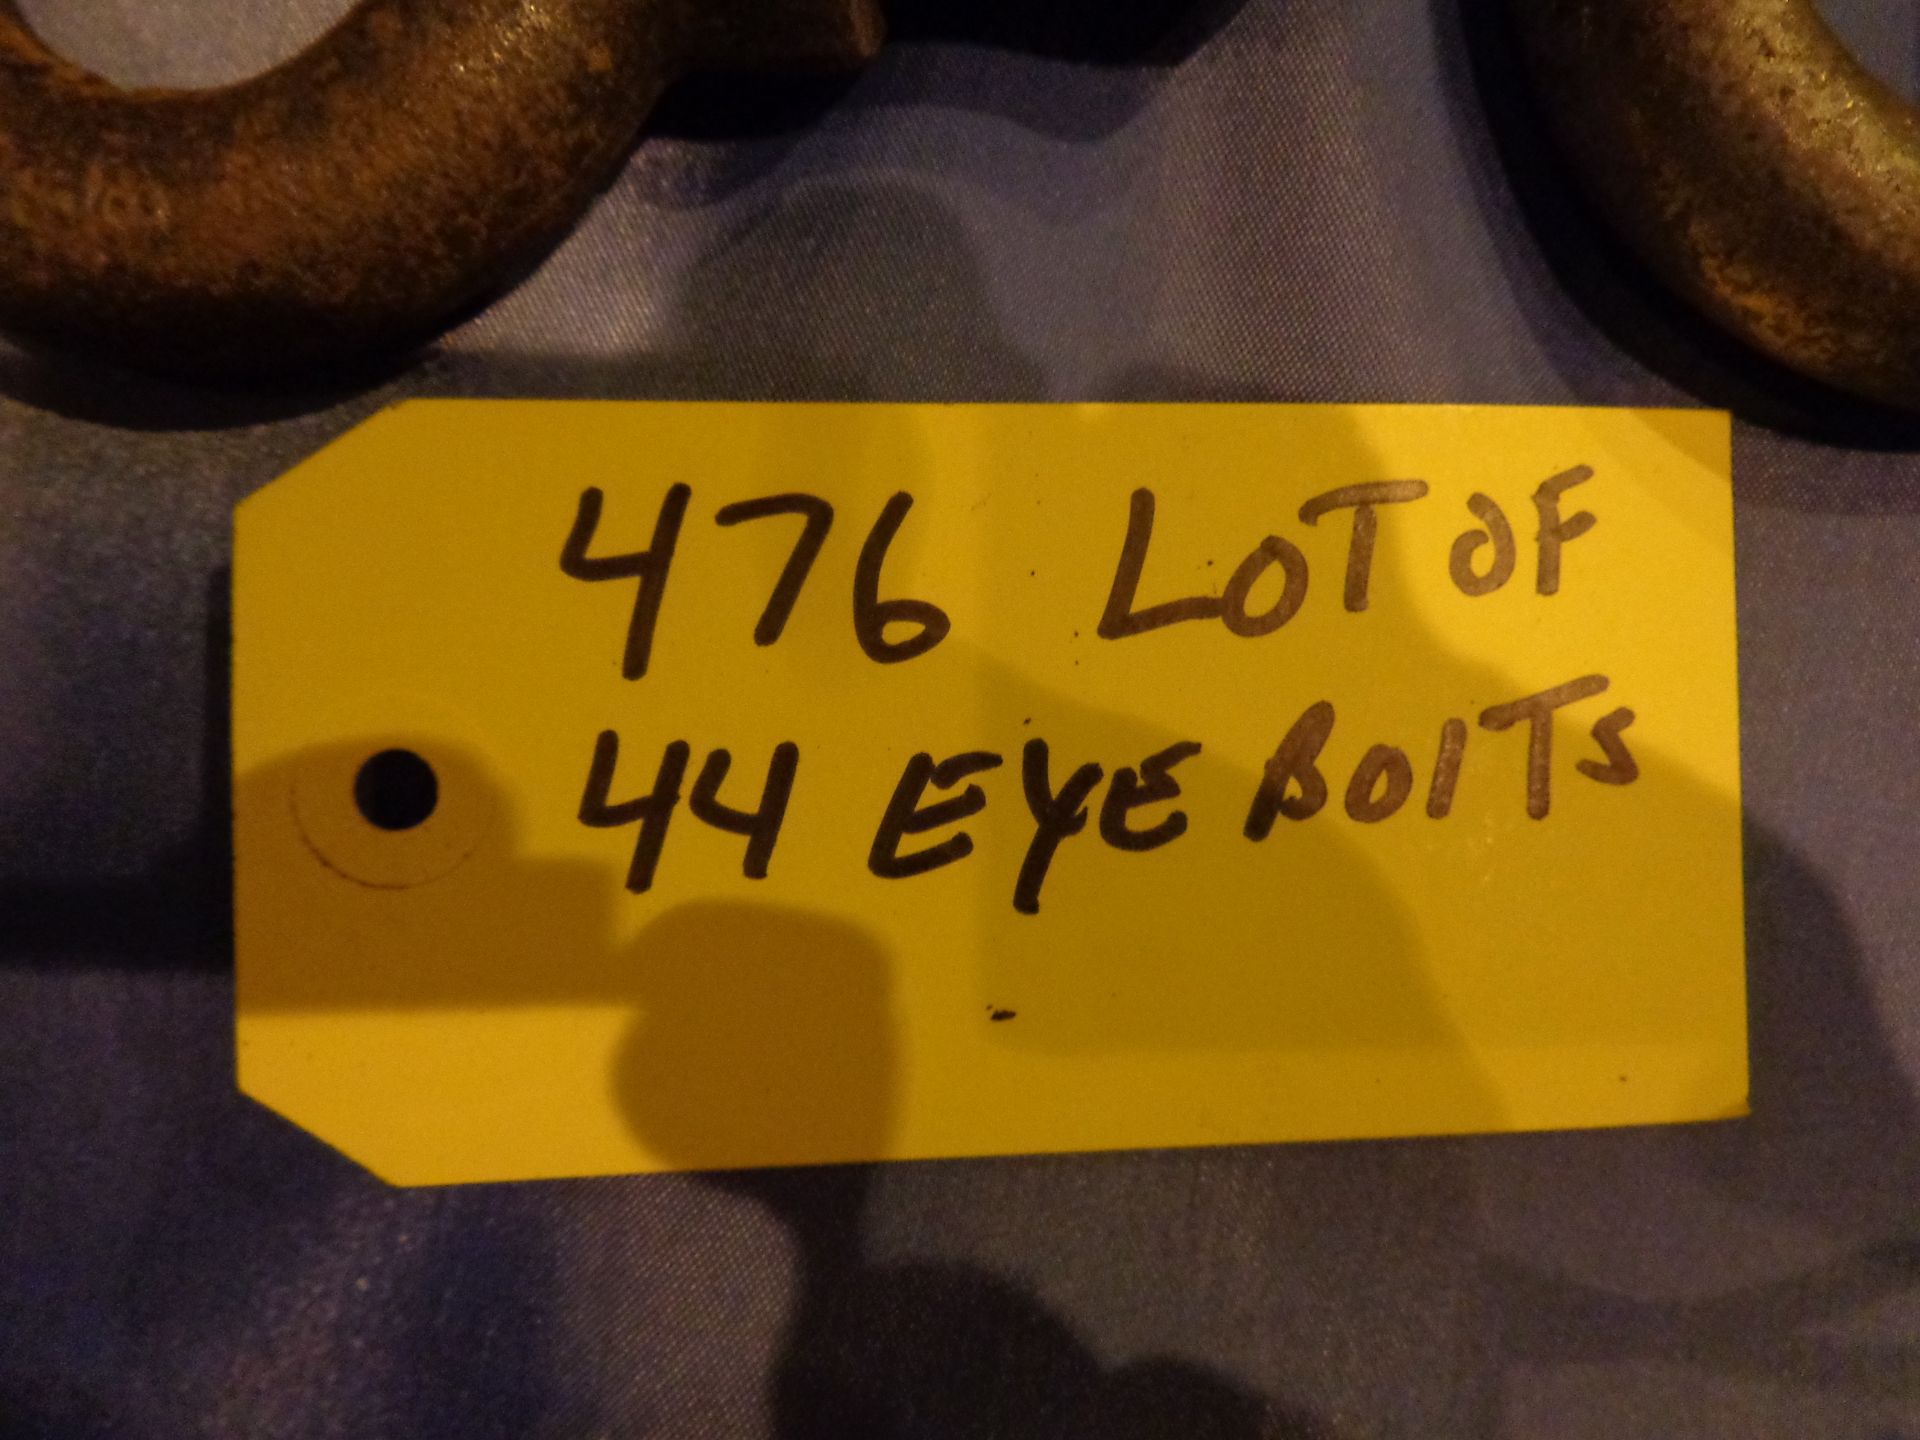 Lot of 44 Eye Bolts (476) - Image 10 of 10